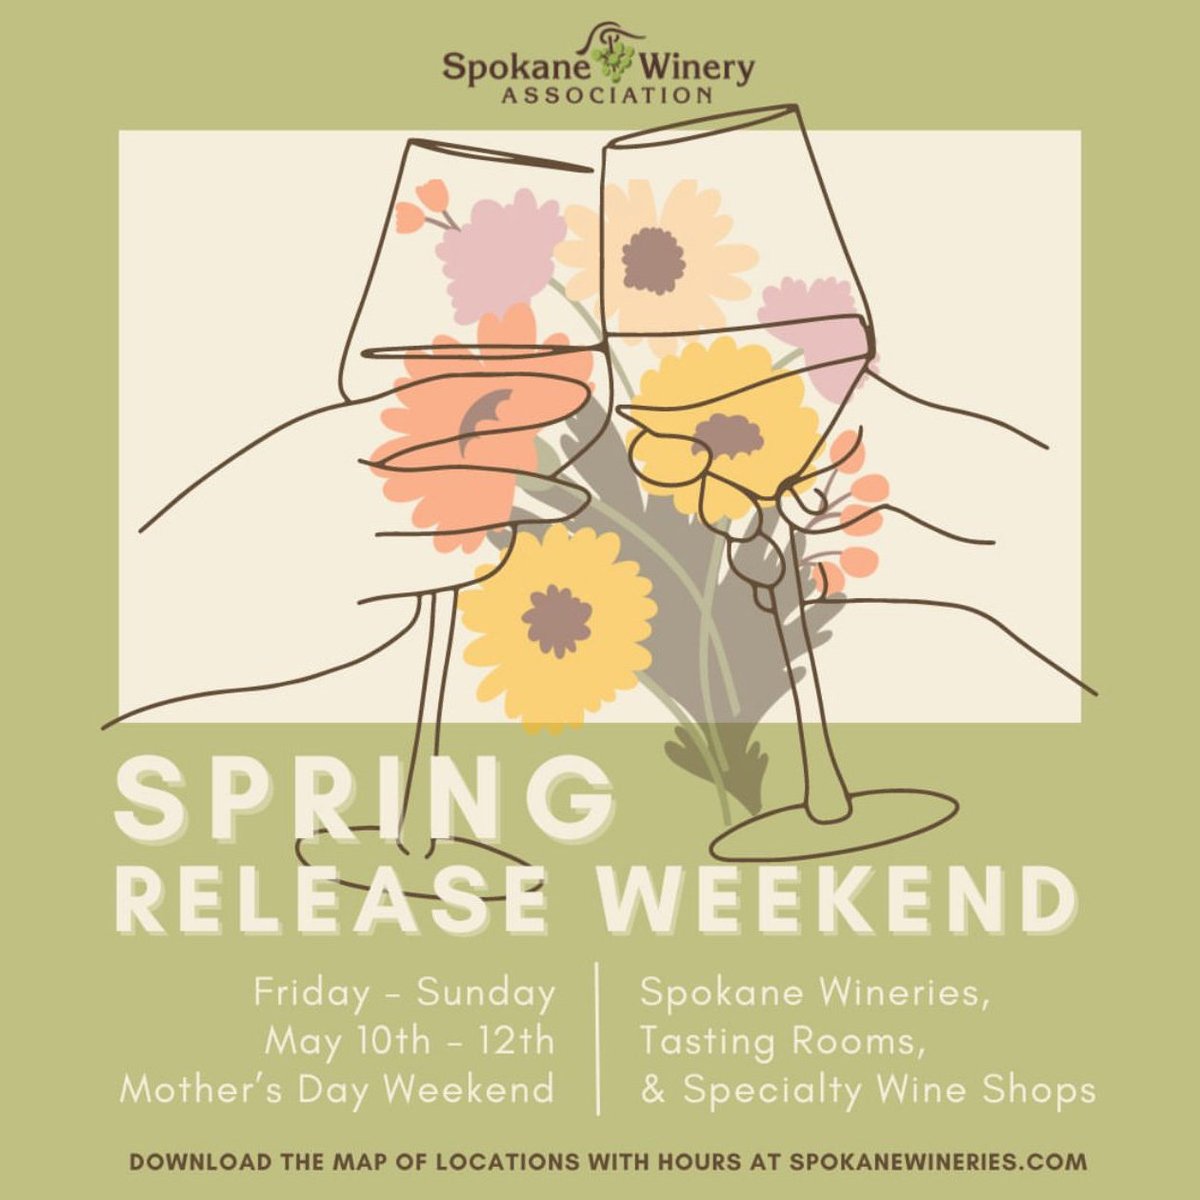 Celebrate #Mother'sDay this weekend at the Spokane #wineries #SpringRelease! Taste new releases at Spokane wineries, #tastingrooms and specialty wine shops. No ticket needed. Just grab your mom plan your weekend at spokanewineries.com